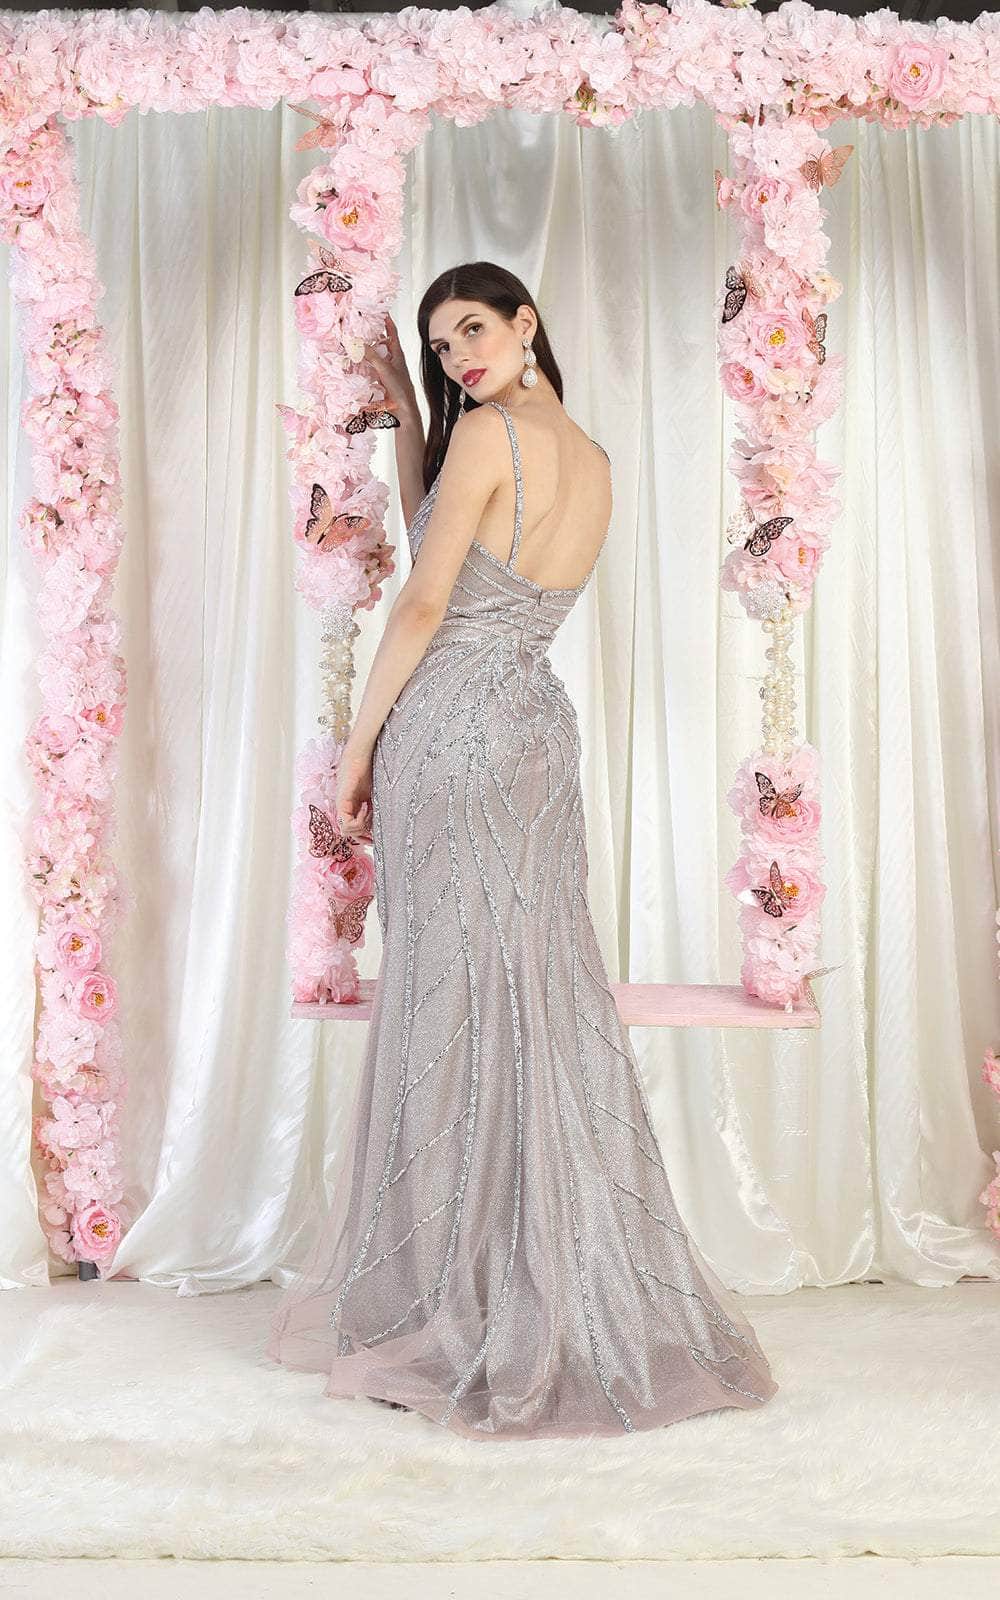 May Queen RQ8023 - Sleeveless Sequined Long Gown Special Occasion Dress